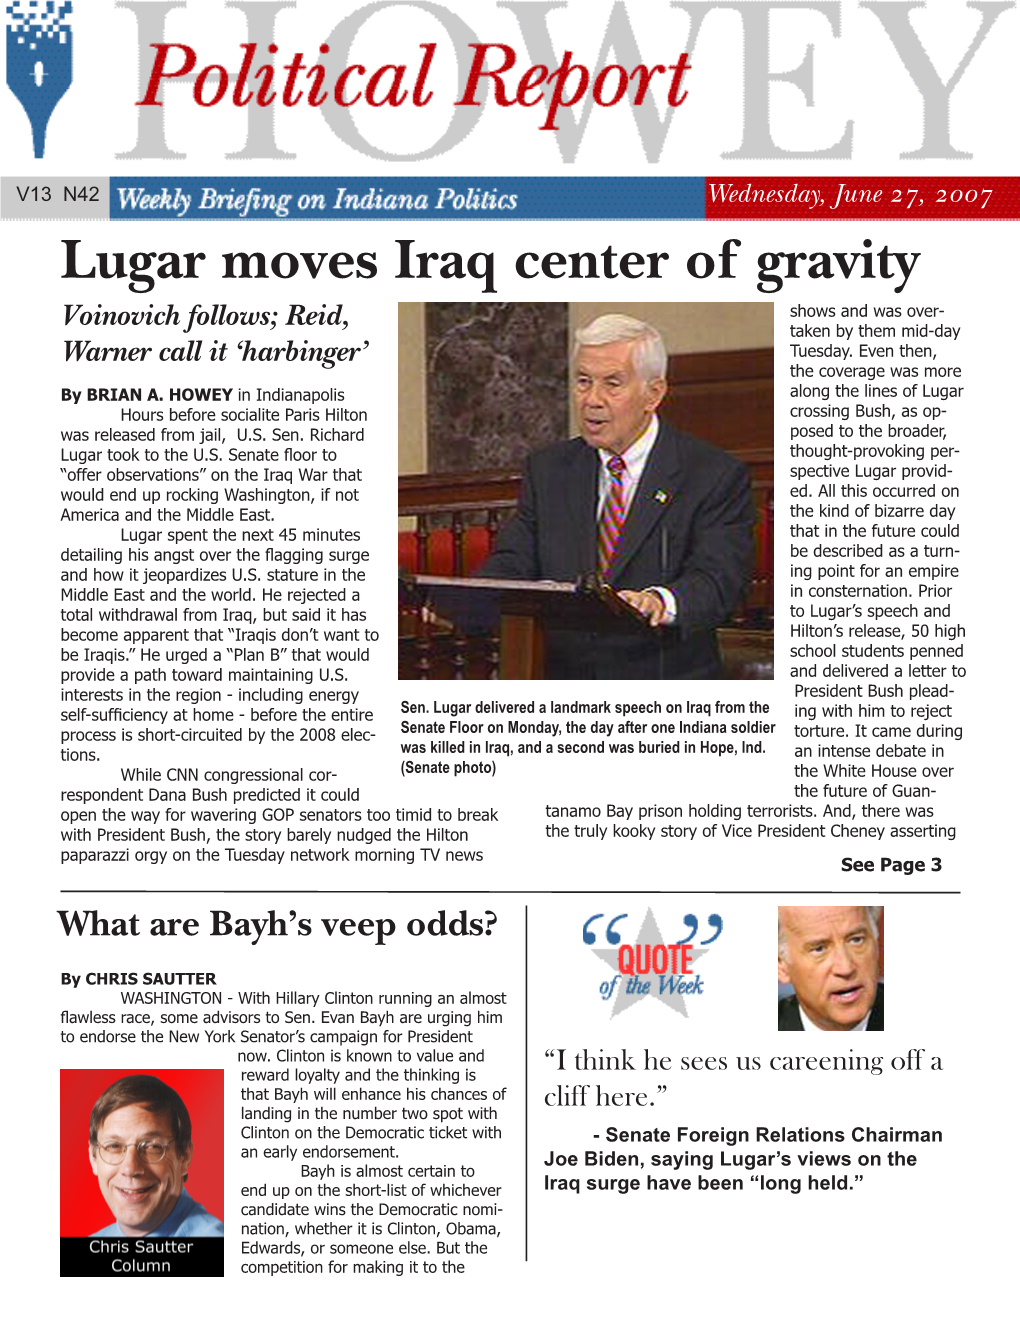 Lugar Moves Iraq Center of Gravity Shows and Was Over- Voinovich Follows; Reid, Taken by Them Mid-Day Warner Call It ‘Harbinger’ Tuesday